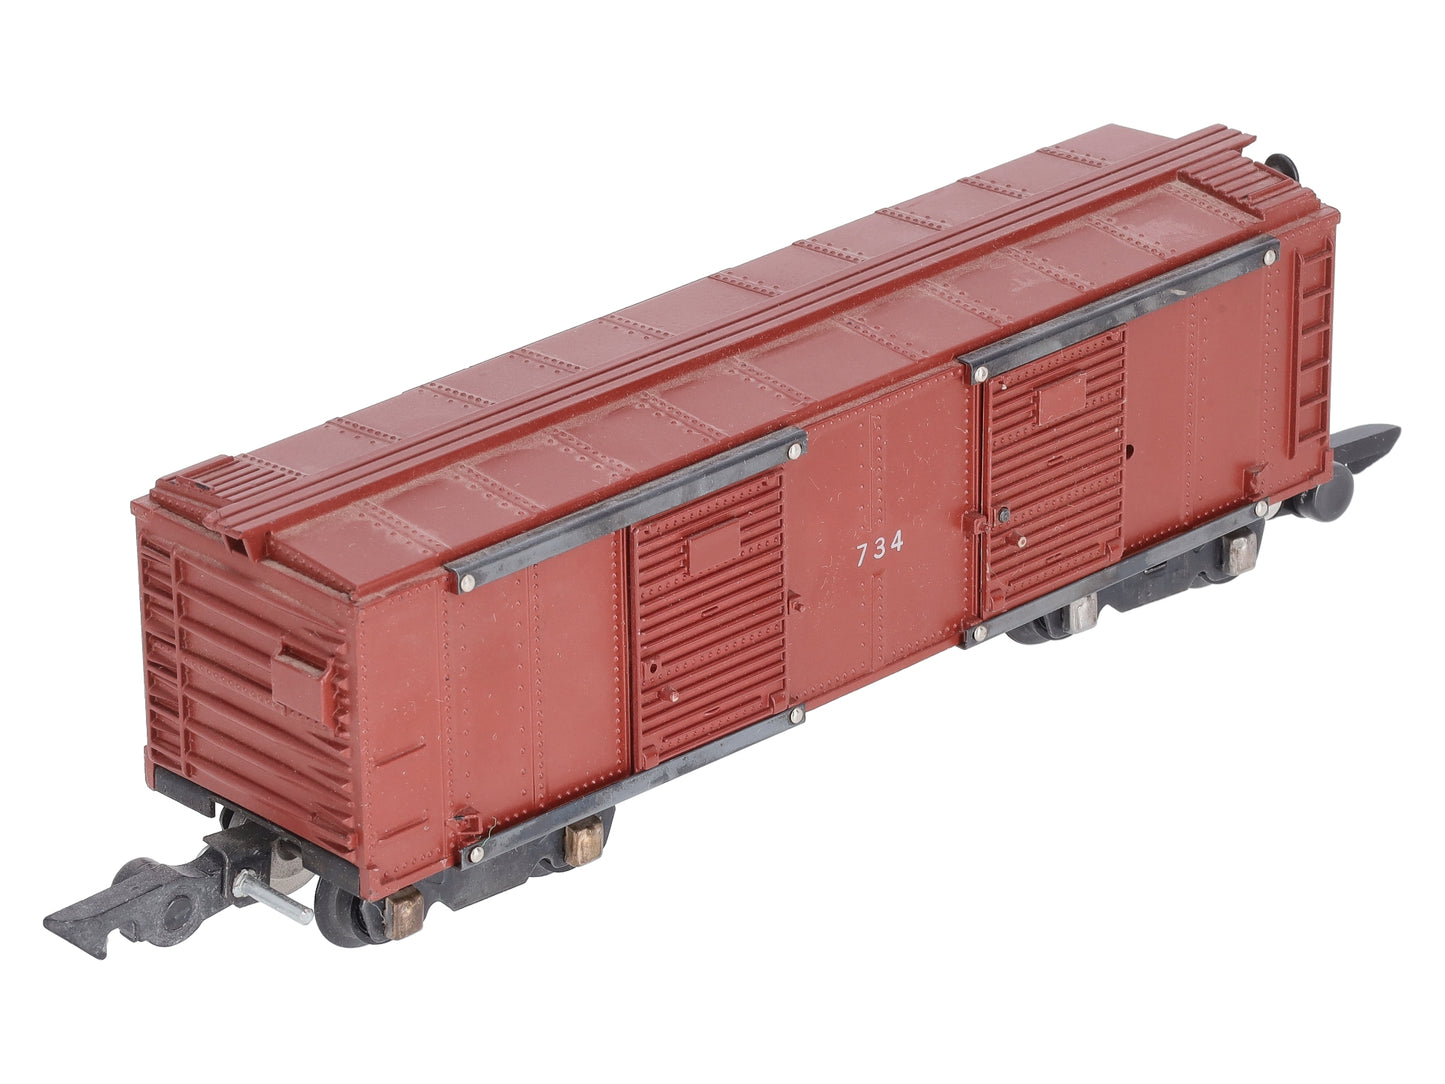 American Flyer 734 Vintage S Operating Boxcar EX